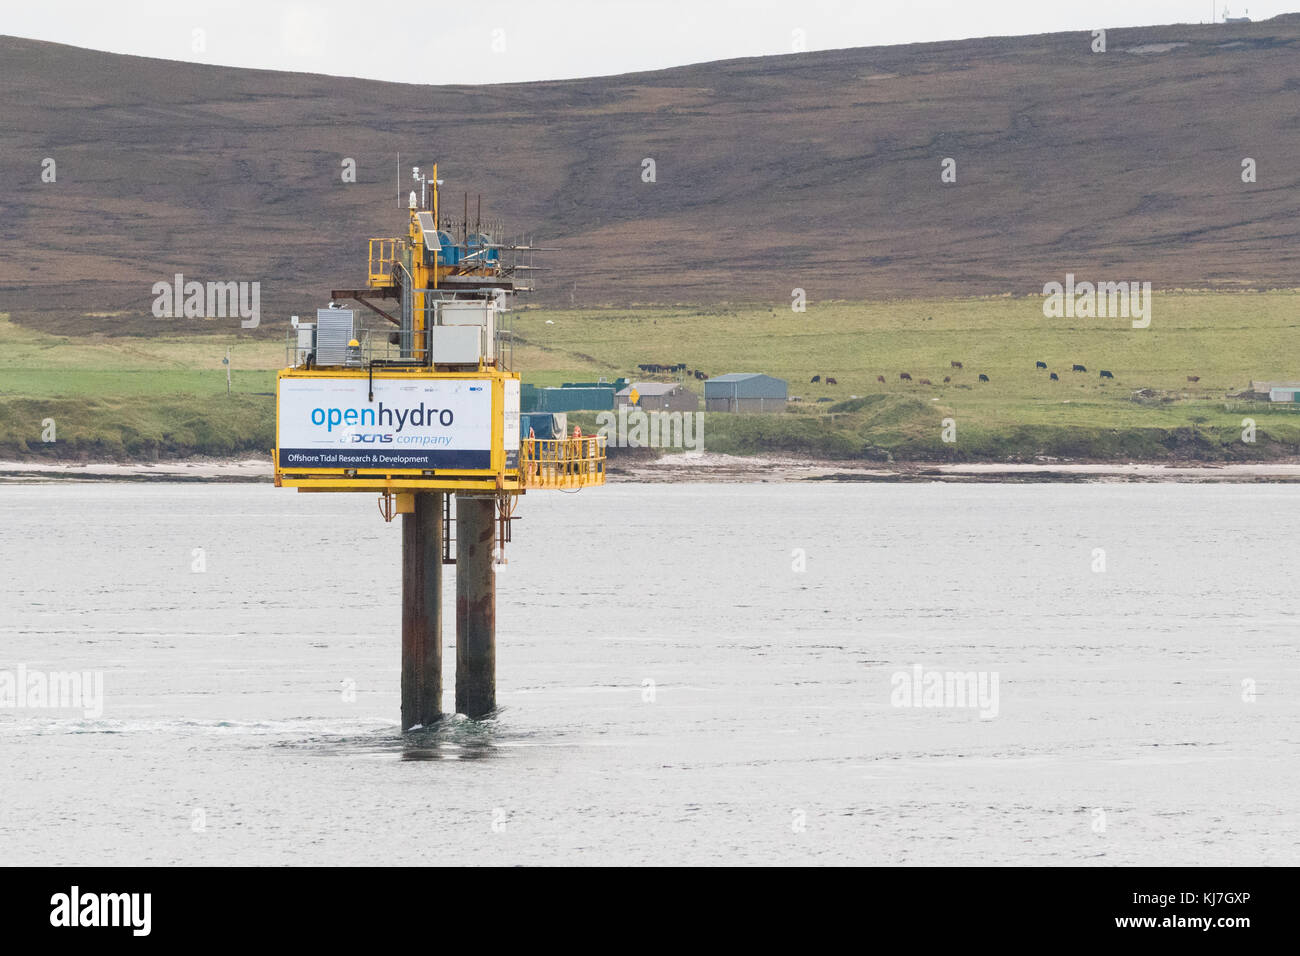 EMEC tidal power test site - testing tidal power turbines in real sea conditions for openhydro, Fall of Warness, island of Eday, Orkney, Scotland, UK Stock Photo